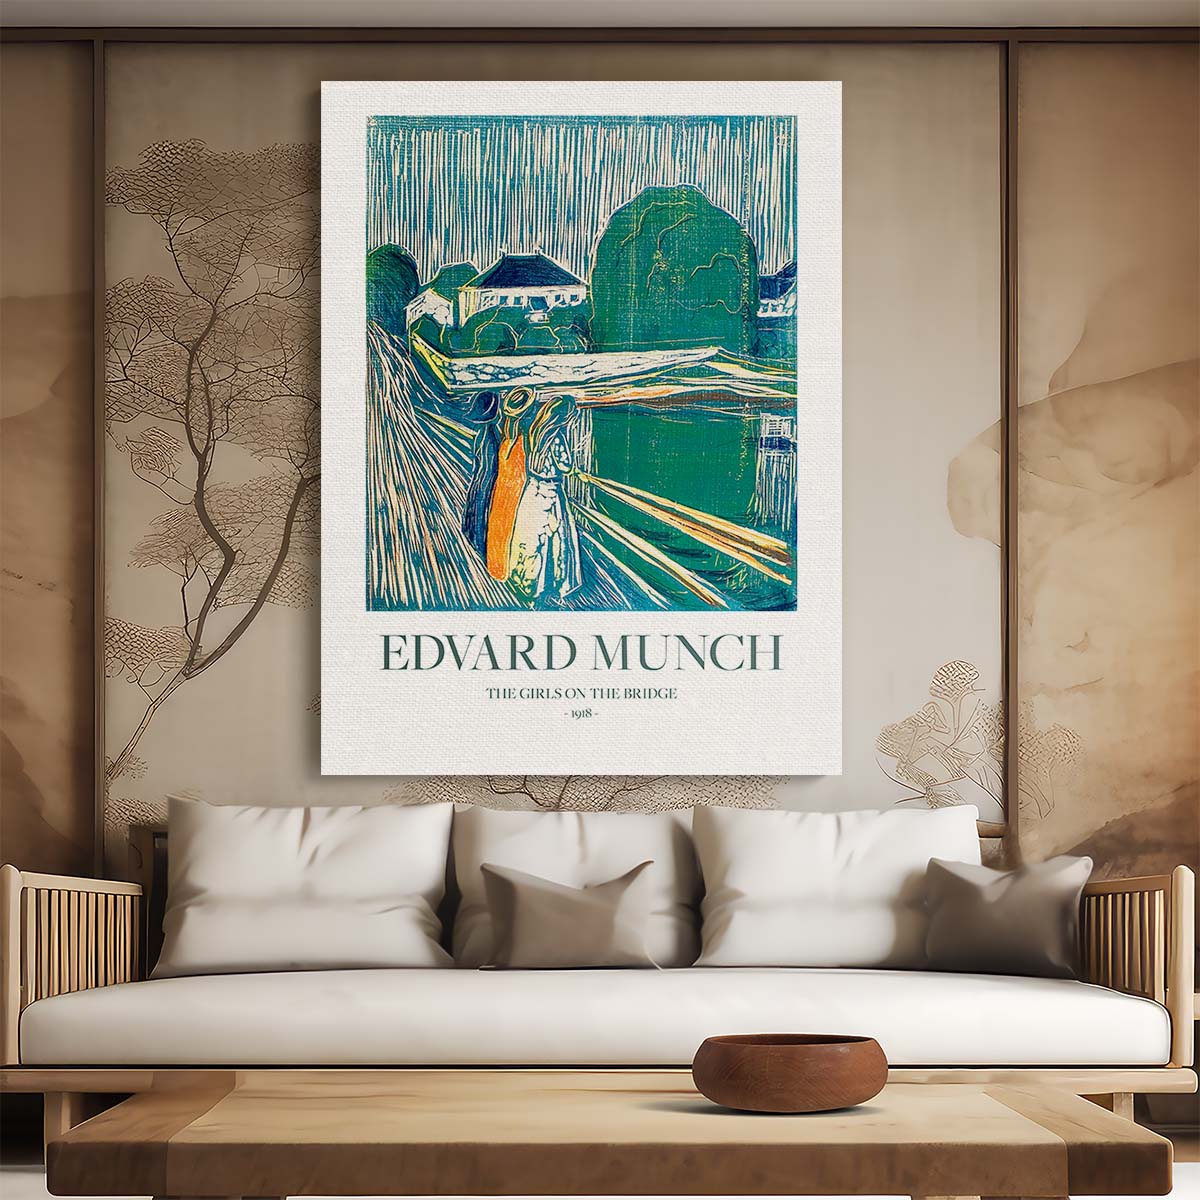 Edvard Munch's 1918 Acrylic Painting 'Girls On The Bridge' by Luxuriance Designs, made in USA